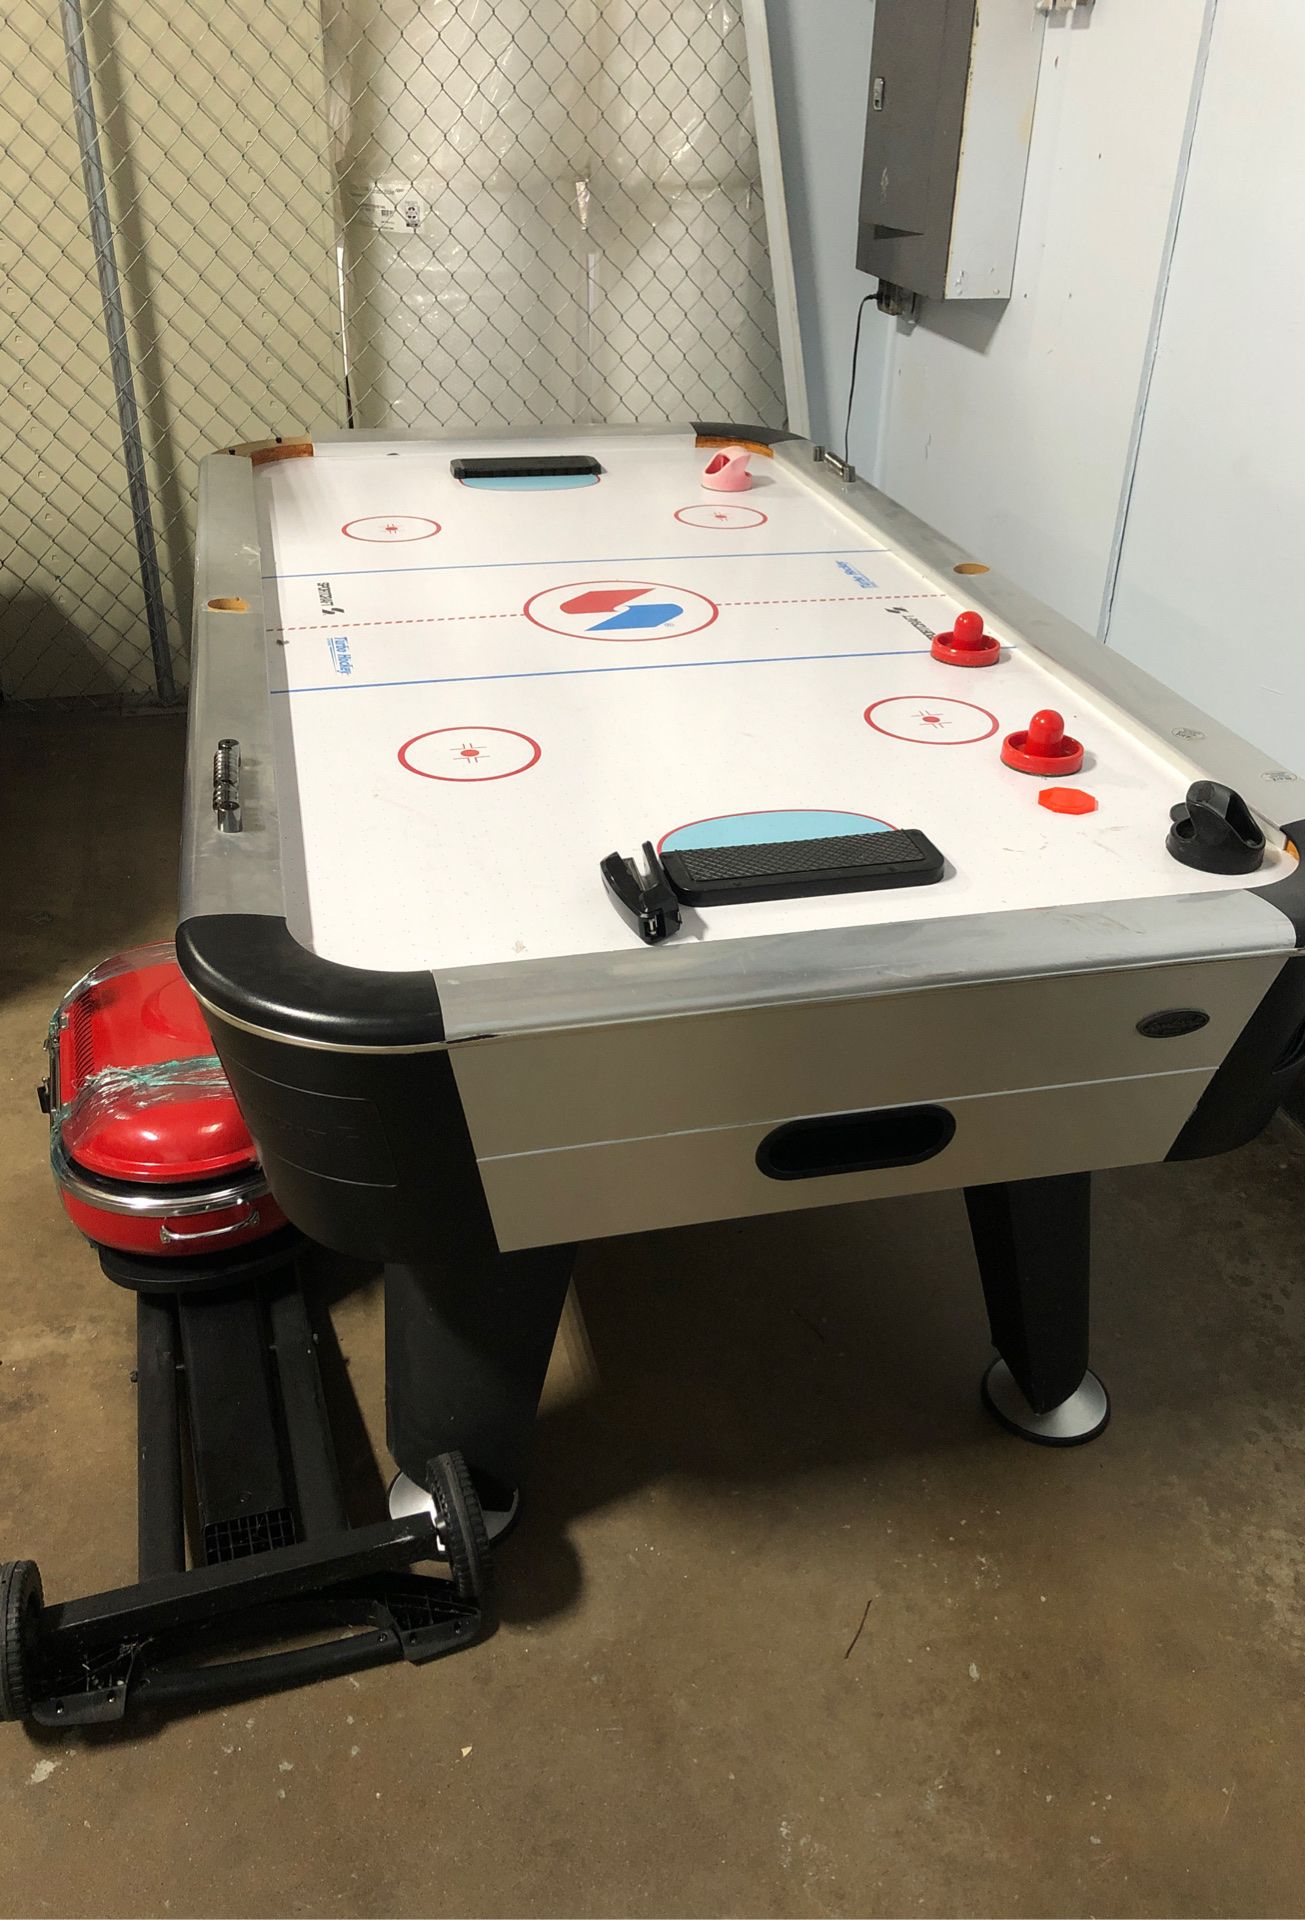 Air hockey table. Need gone today.